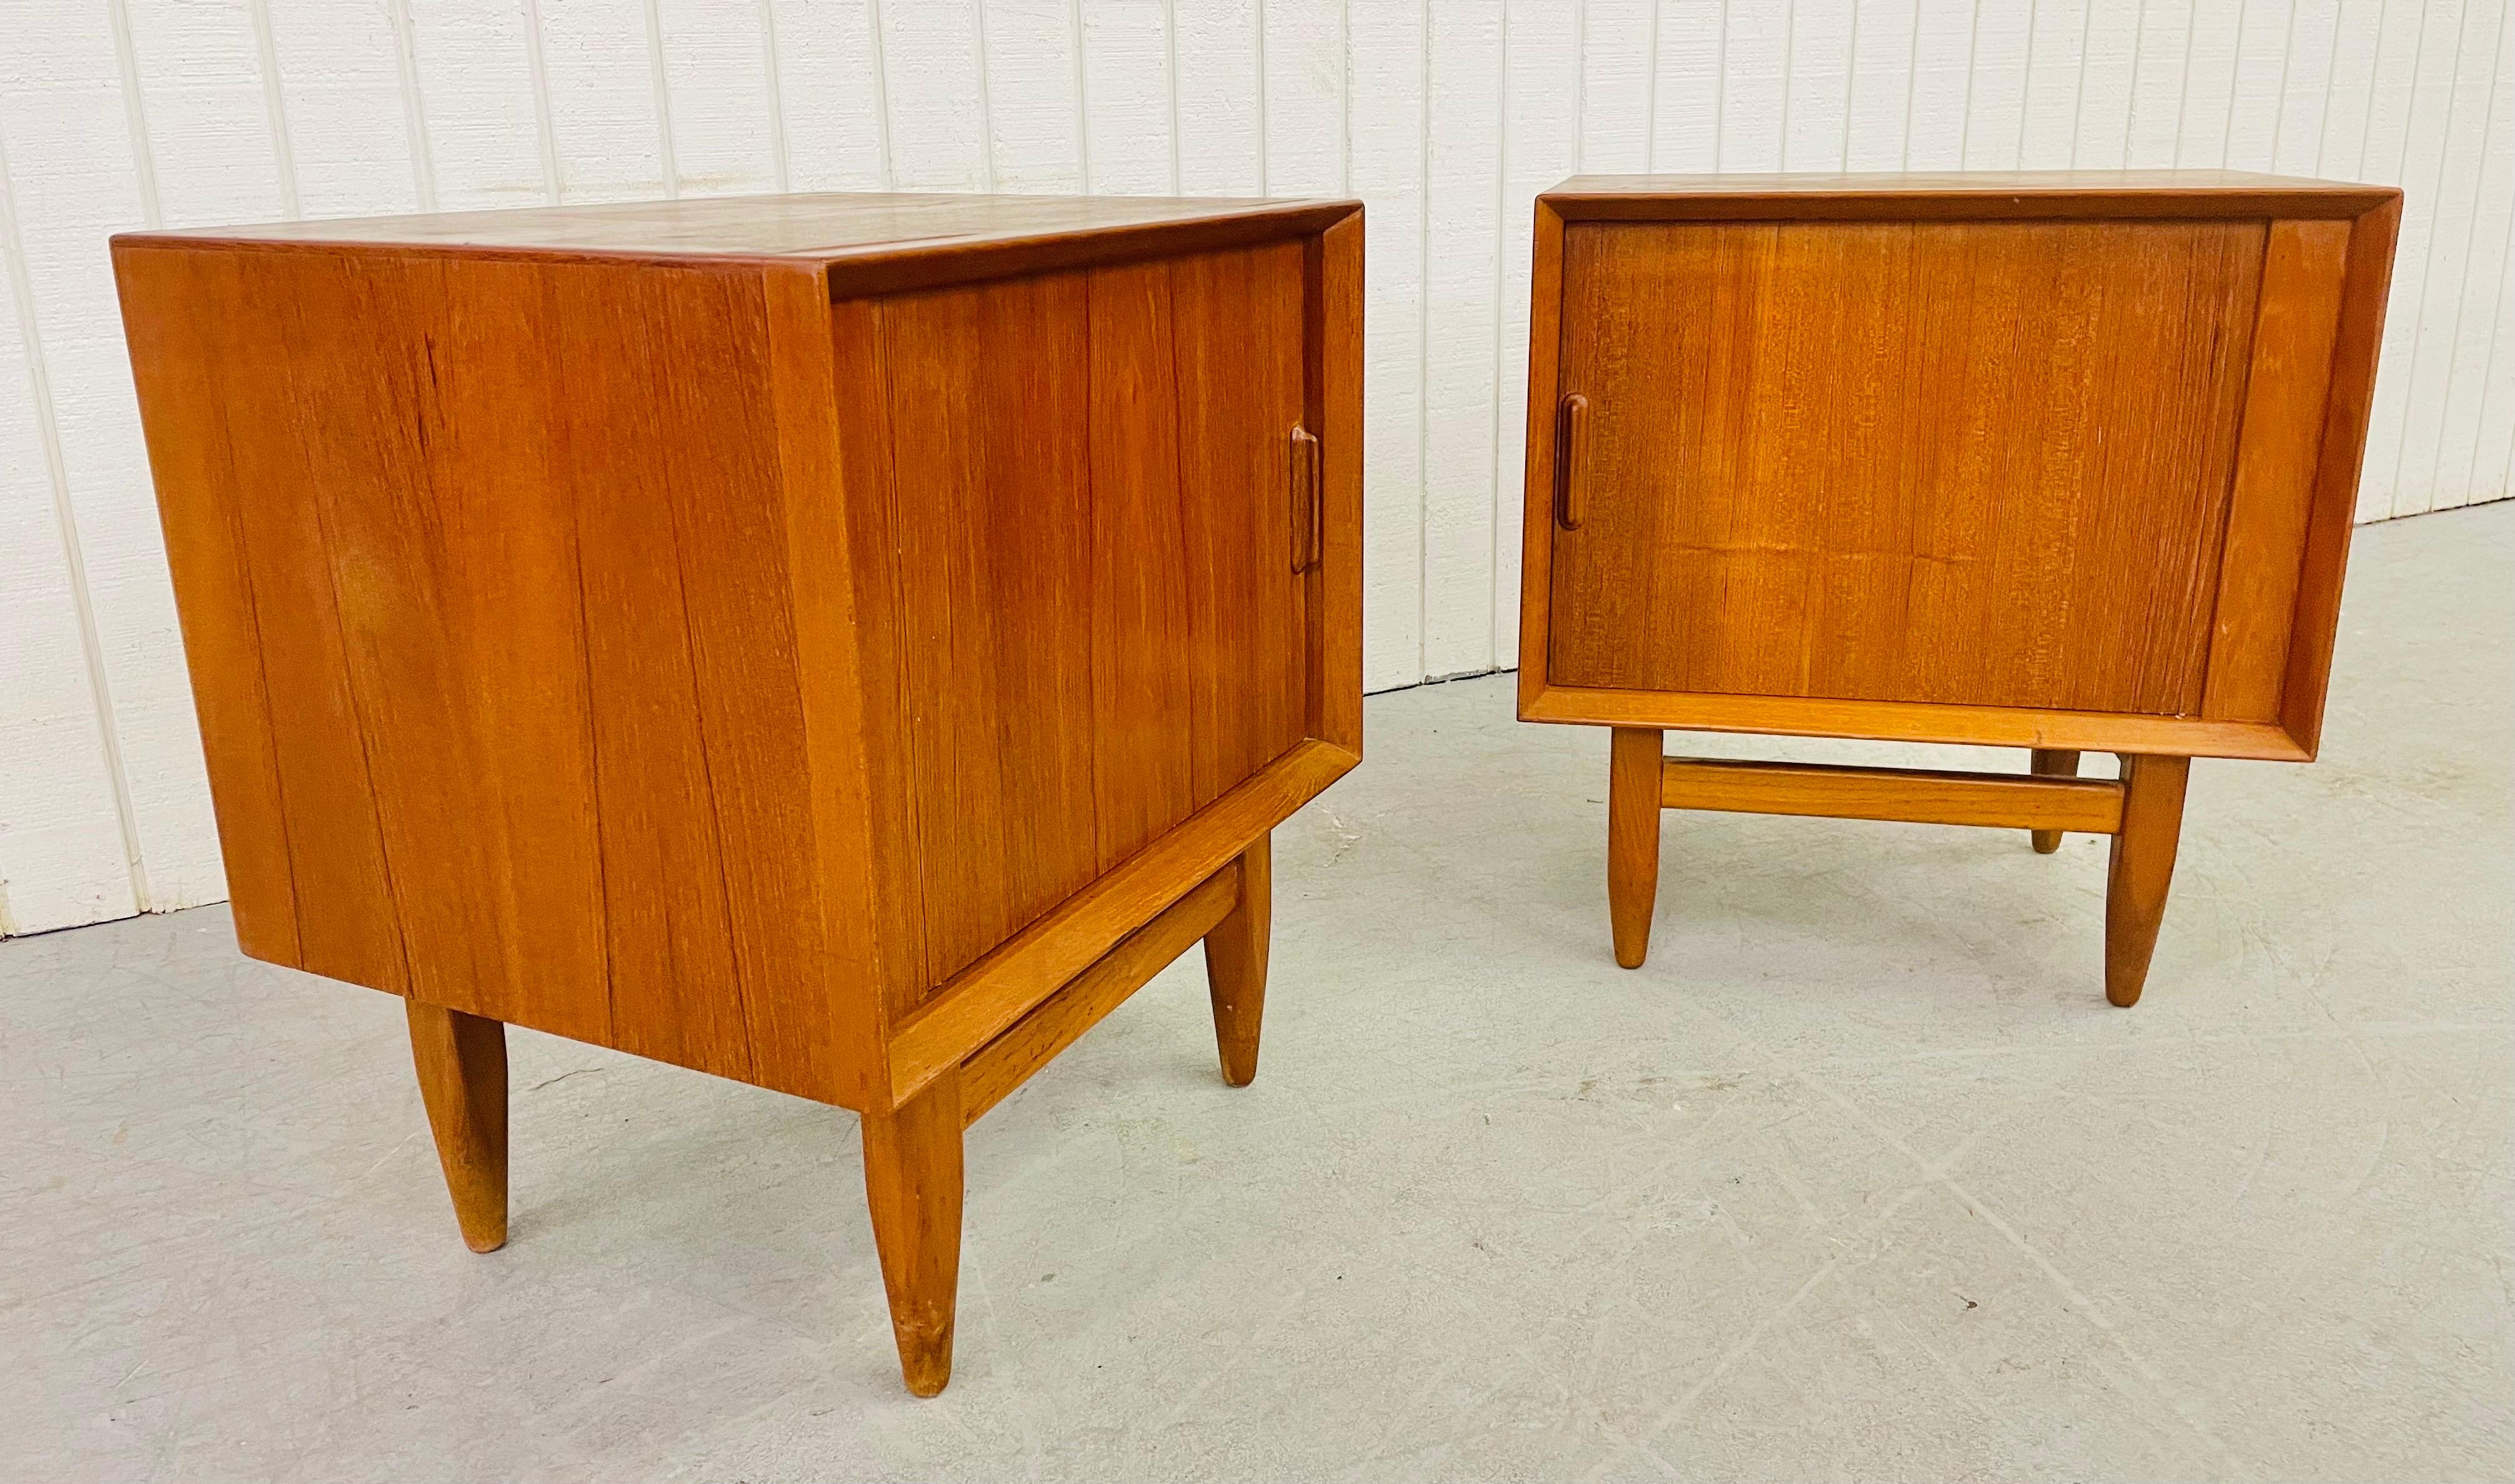 This listing is for an exceptional pair of Mid-Century Danish Modern Falster Teak Tambour nightstands. Featuring a sliding tambour door, a single drawer, a shelf, and a beautiful teak finish.